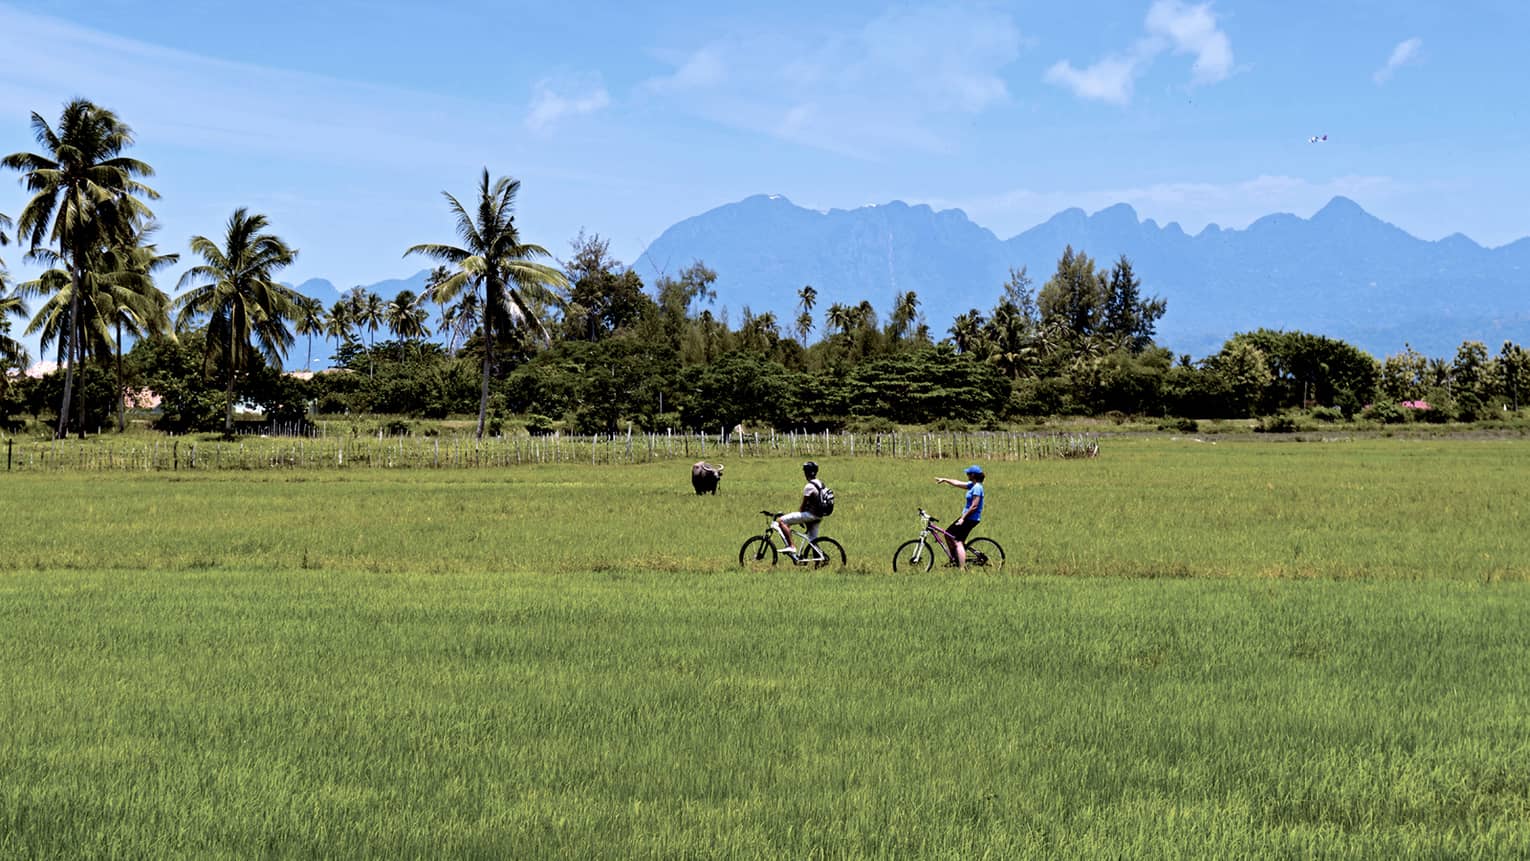 Couple riding bicycles through grassy field, tropical trees, mountains in distance